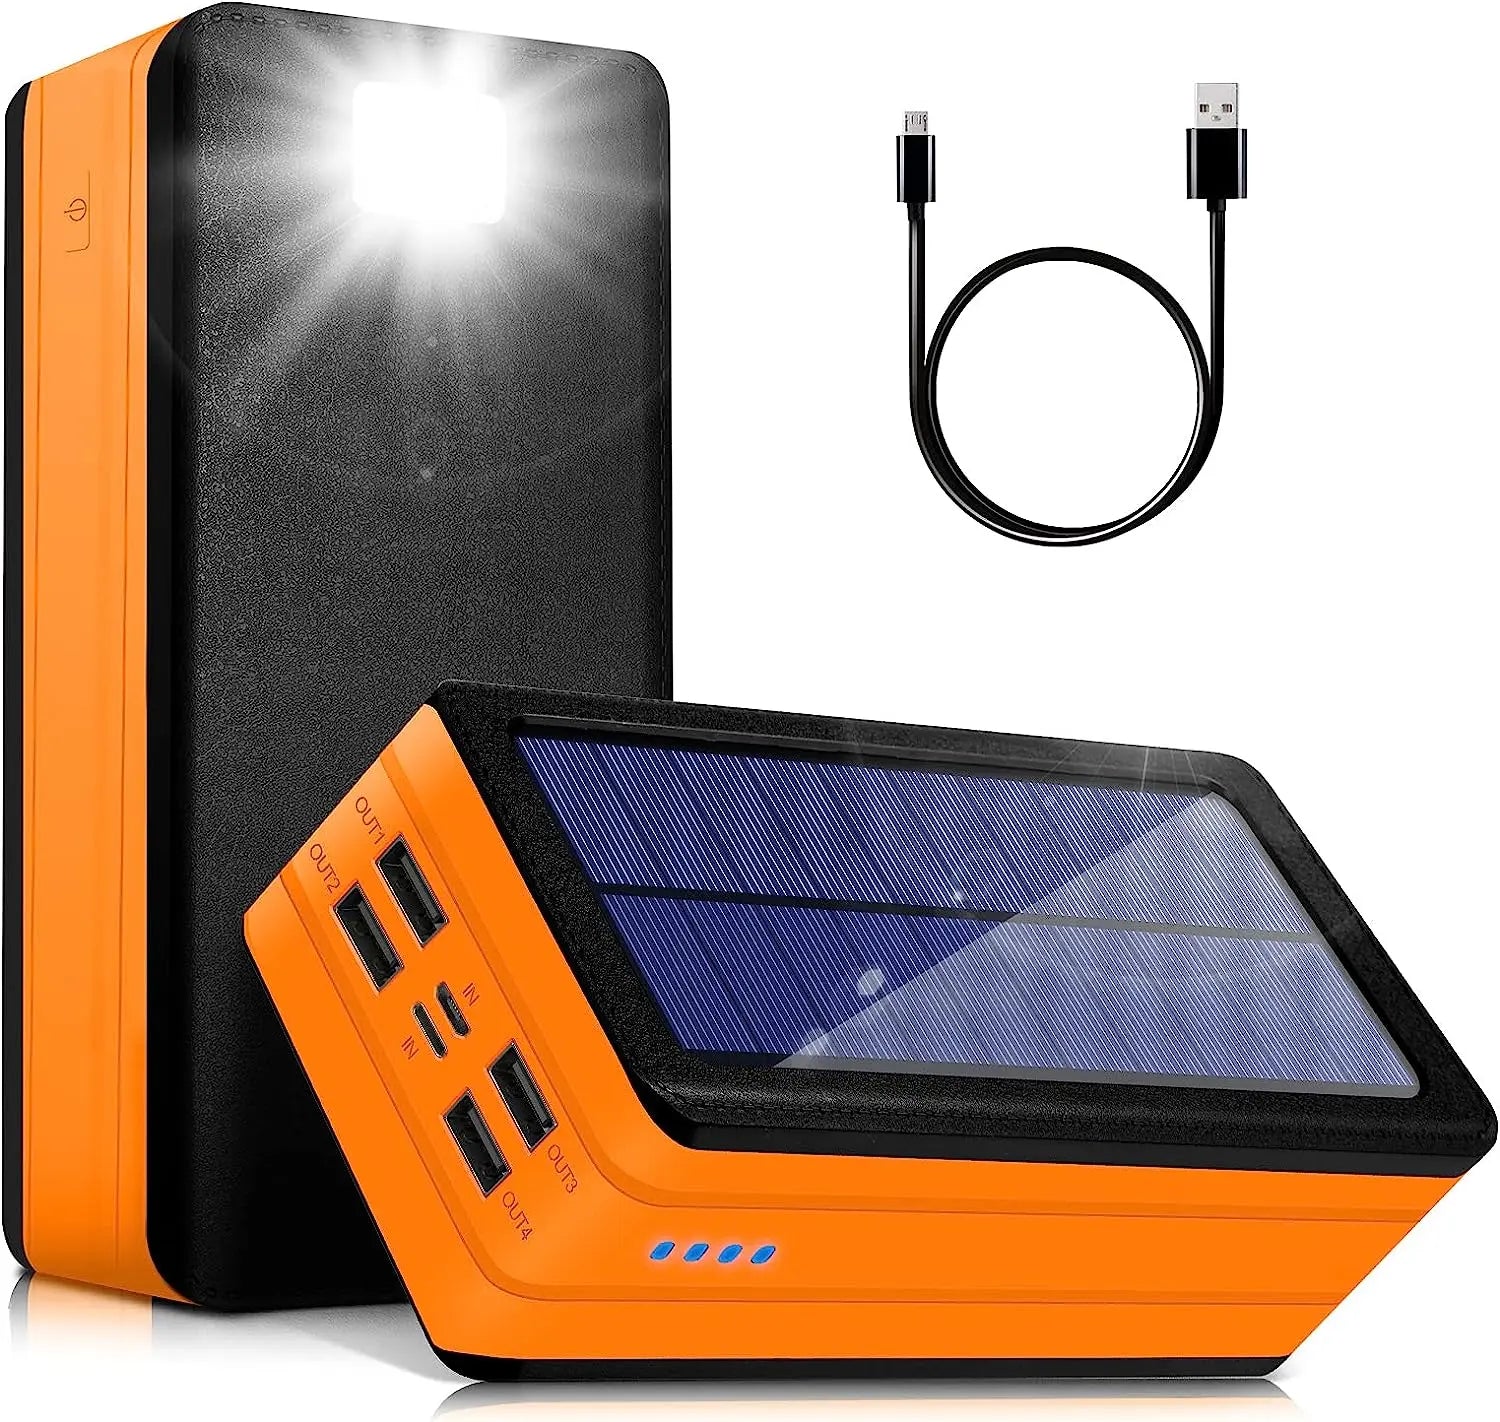 Solar Power Bank 50000Mah, Portable Solar Phone Charger with Flashlight, 4 Output Ports, 2 Input Ports, Solar Battery Bank Compatible with Iphone for Camping, Hiking, Trips